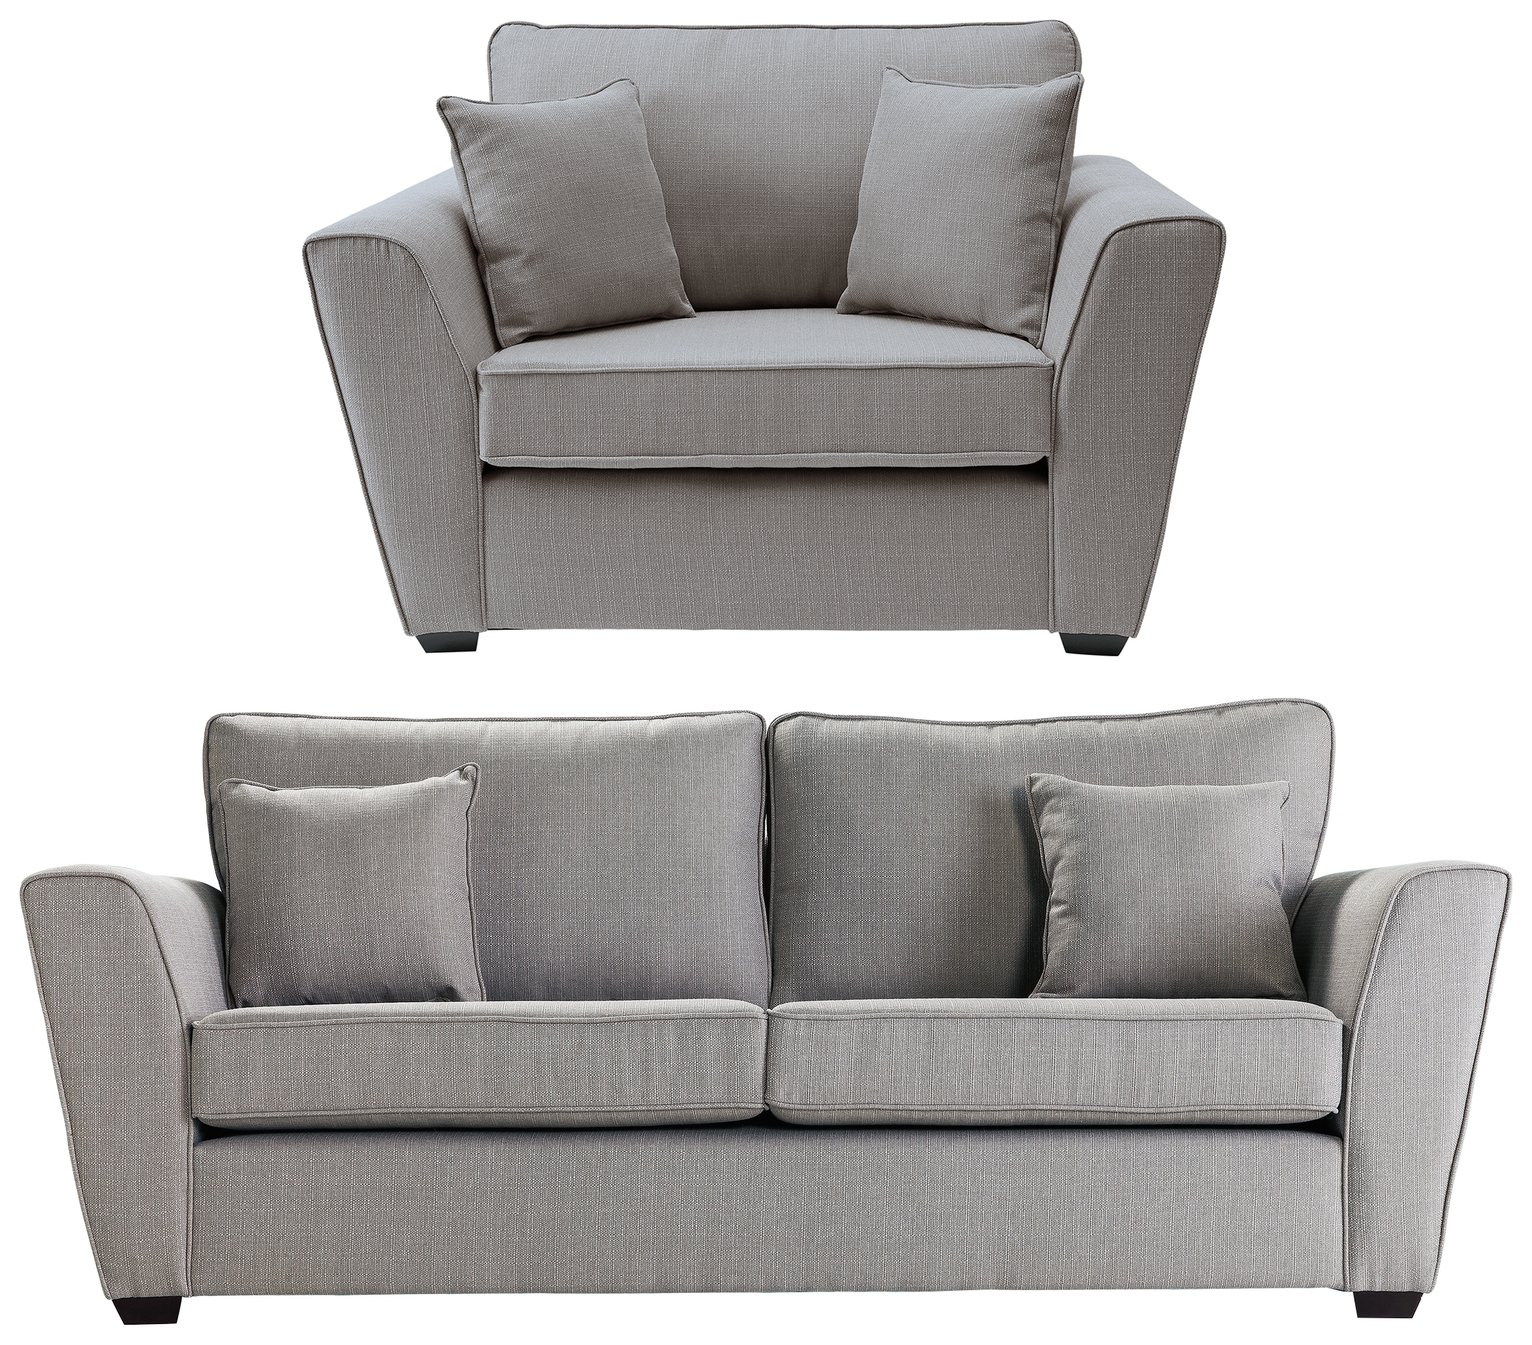 Review of Collection Renley 3 Seater Sofa and Chair - Light Grey